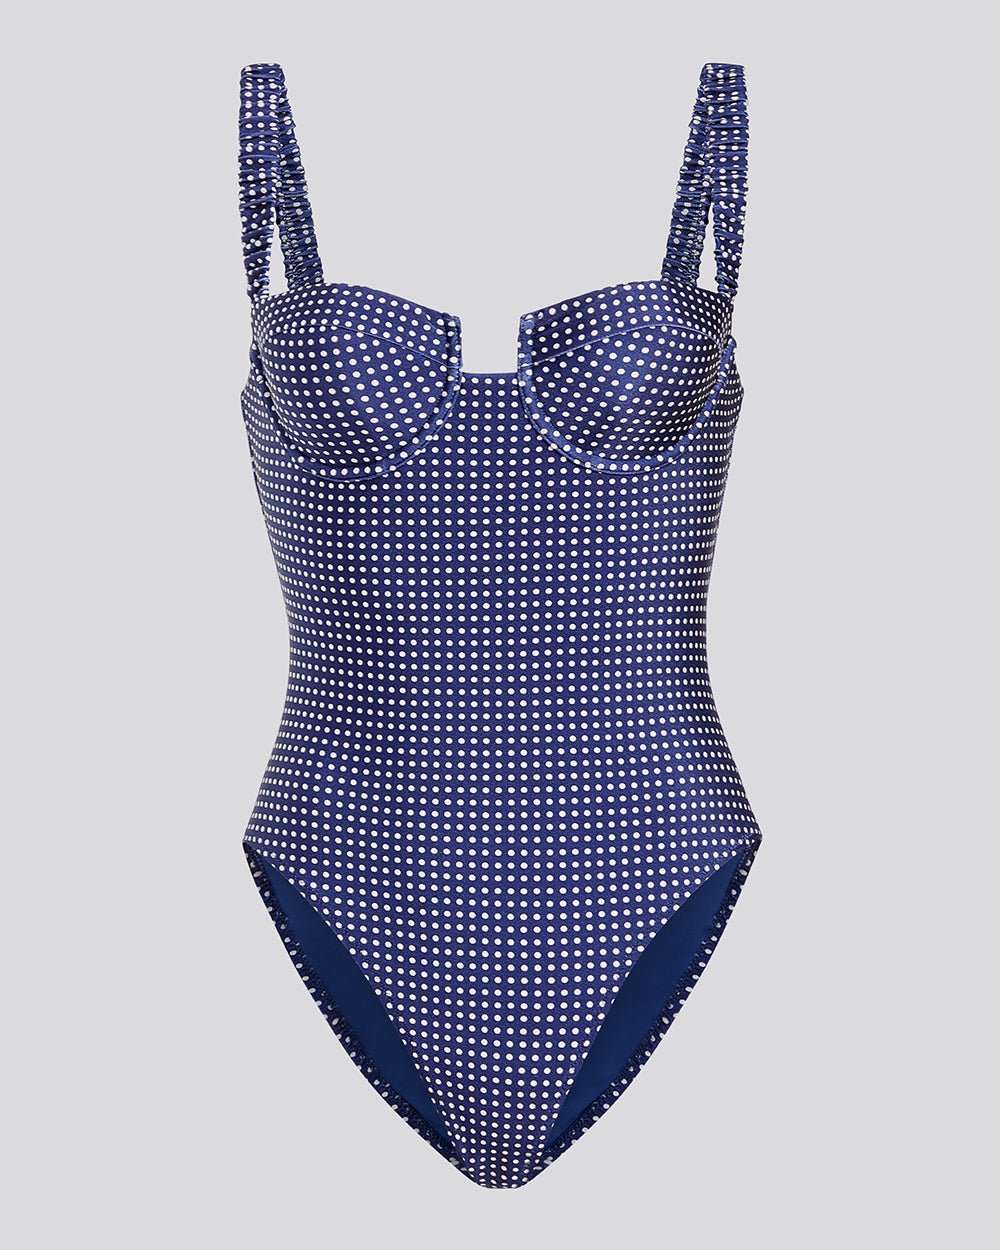 The Verona One Piece - Solid & Striped